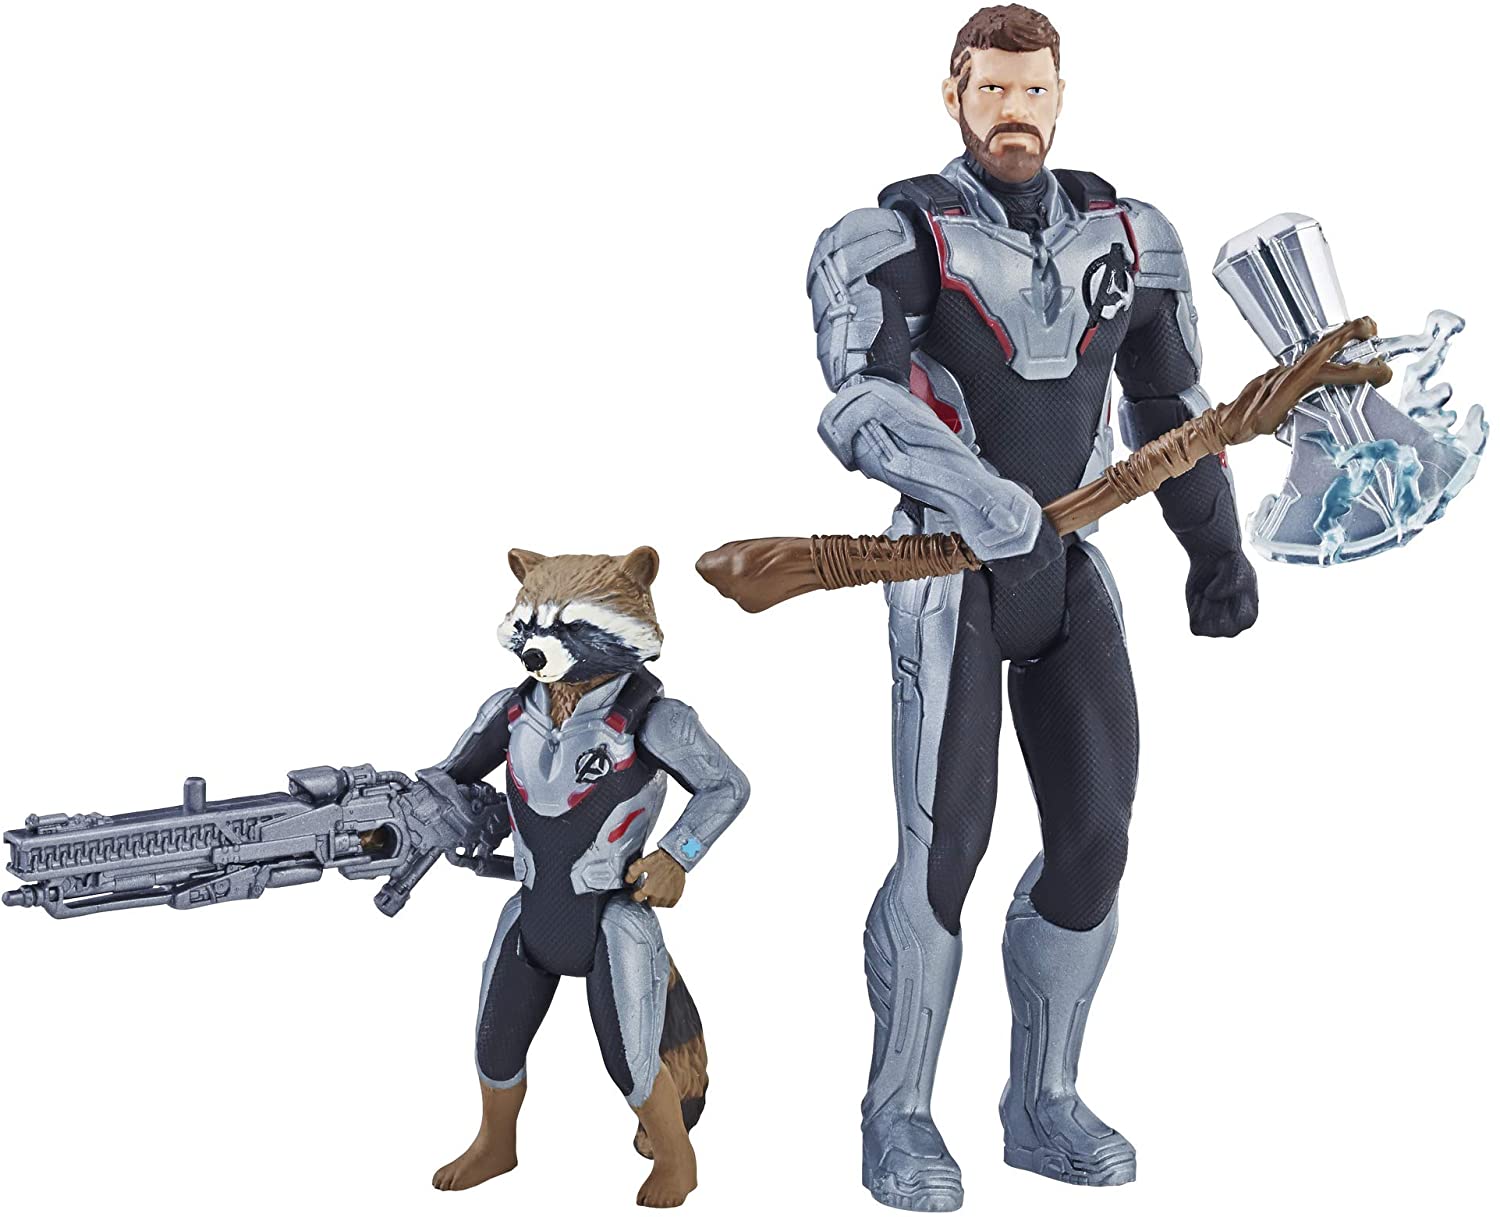 Avengers Marvel Endgame Thor & Rocket Raccoon 2 Pack Characters from Marvel Cinematic Universe Mcu Movies: Toys & Games